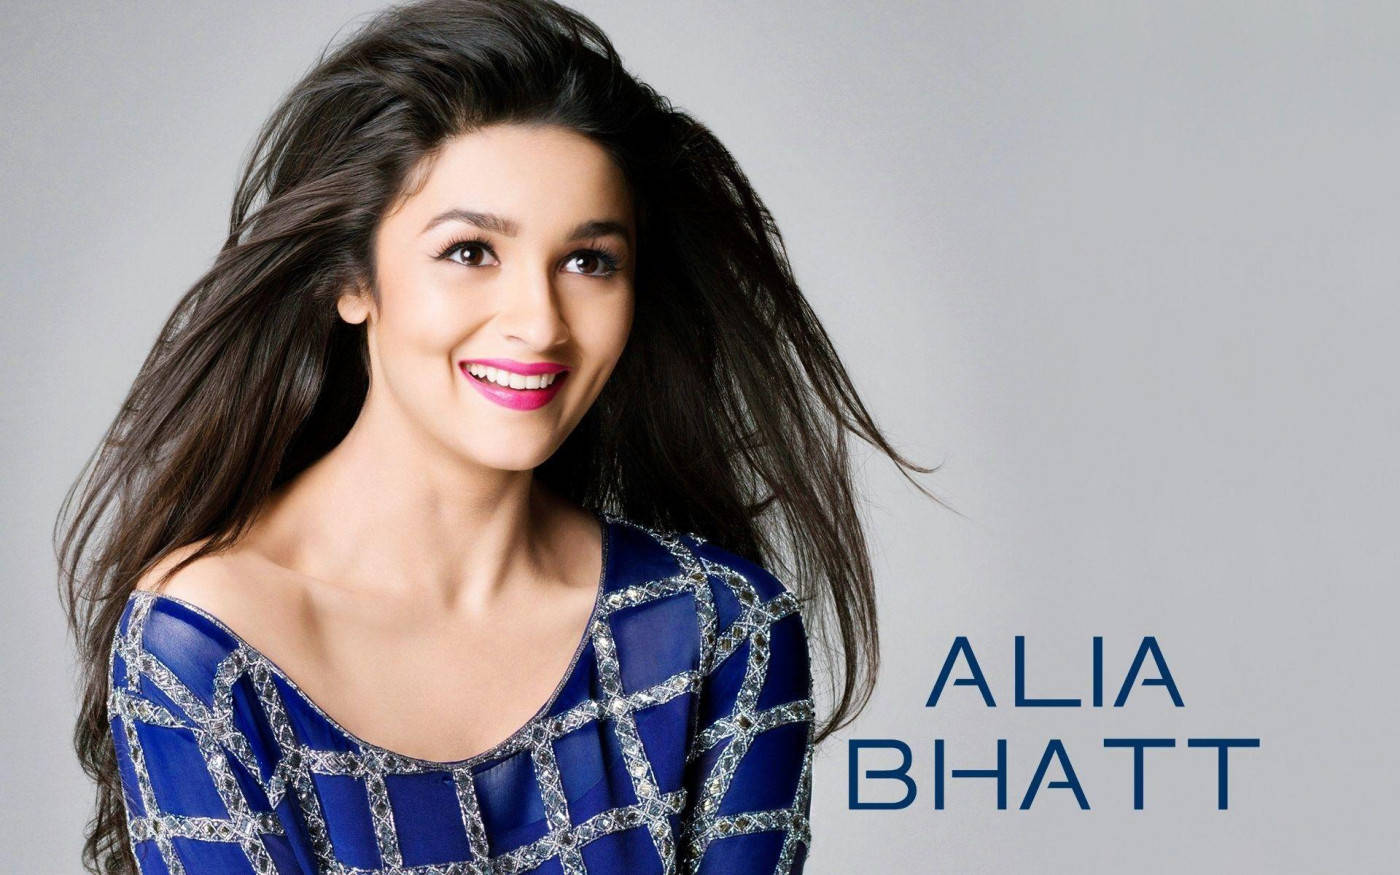 Alia Bhatt Hd With Her Name In Blue Wallpaper